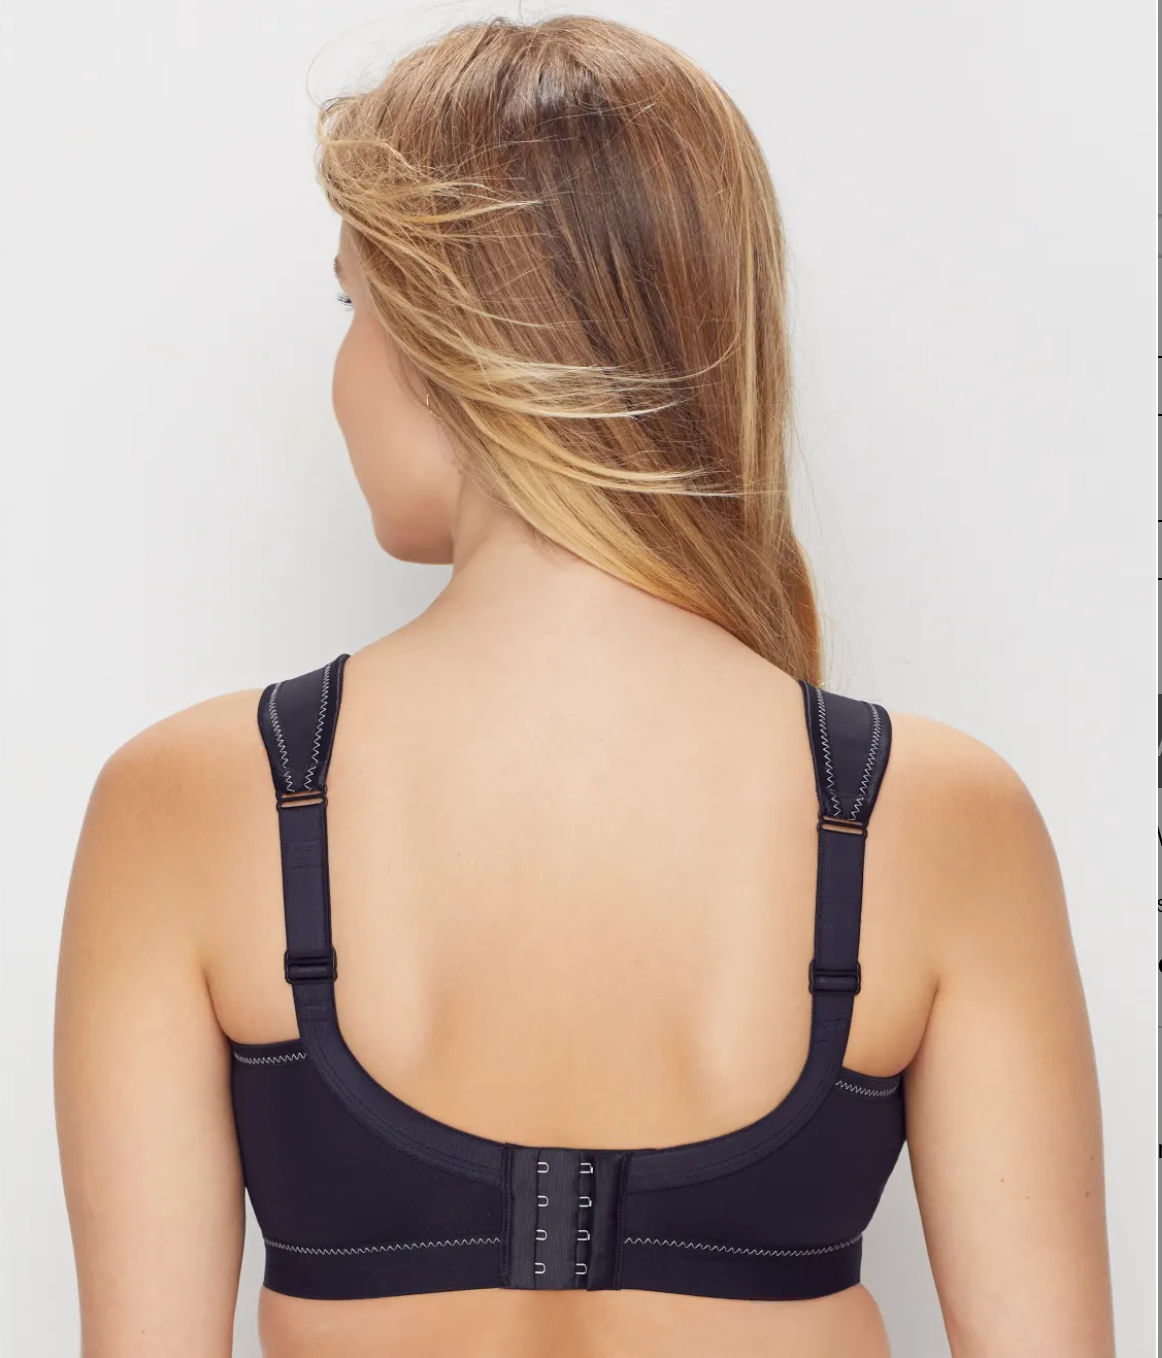 LIGHT & FIRM SPORTS BRA - Expect Lace